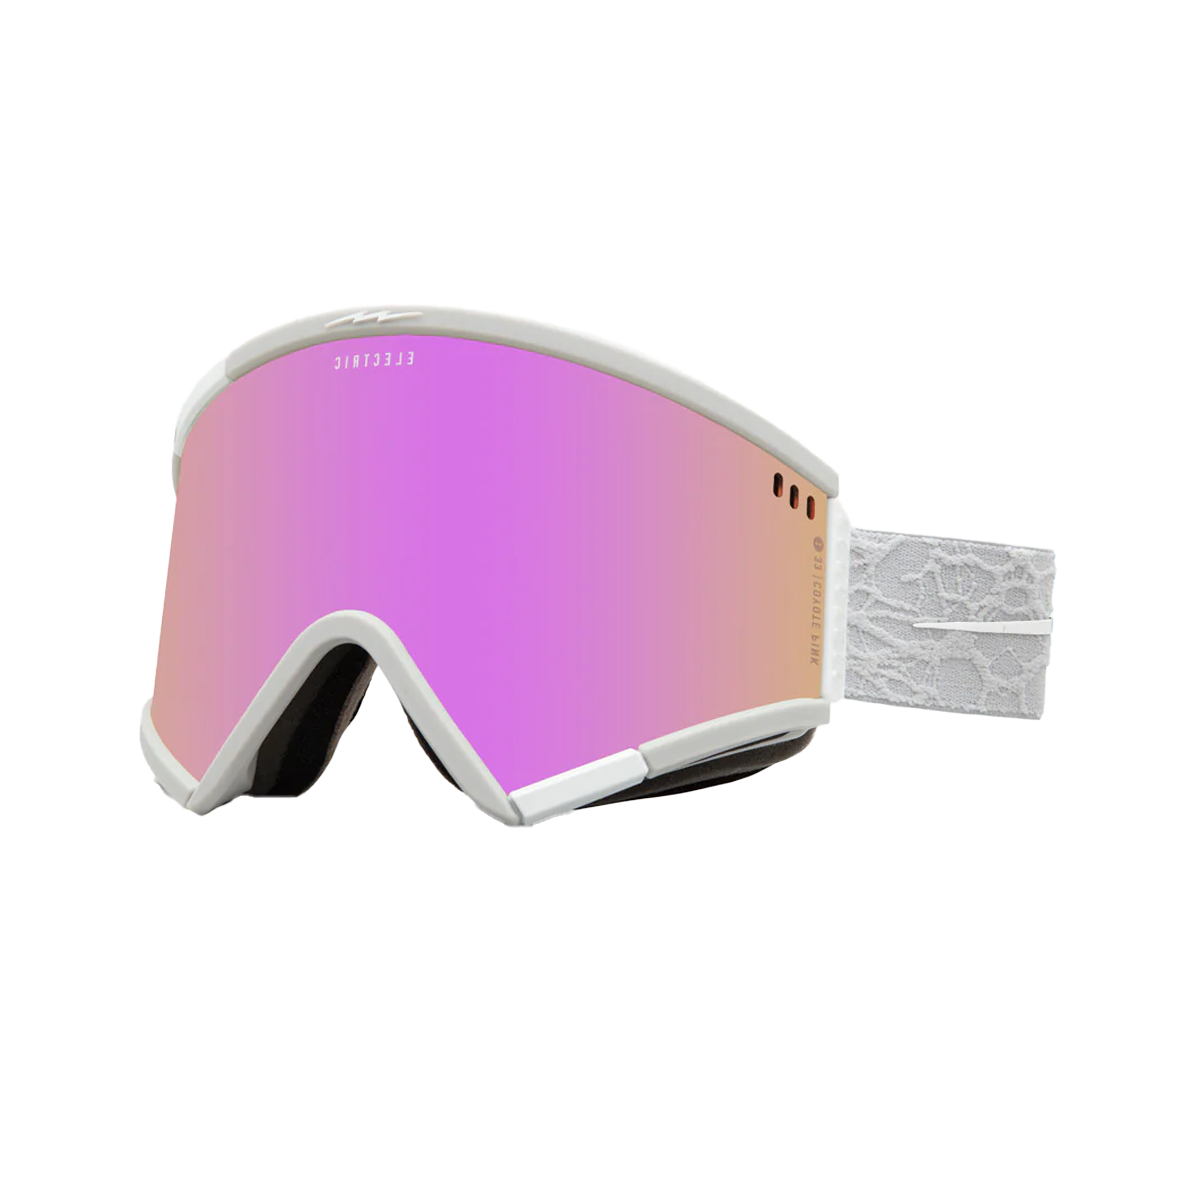 Electric Roteck Goggles - Matte Grey Neuron / Coyote Pink